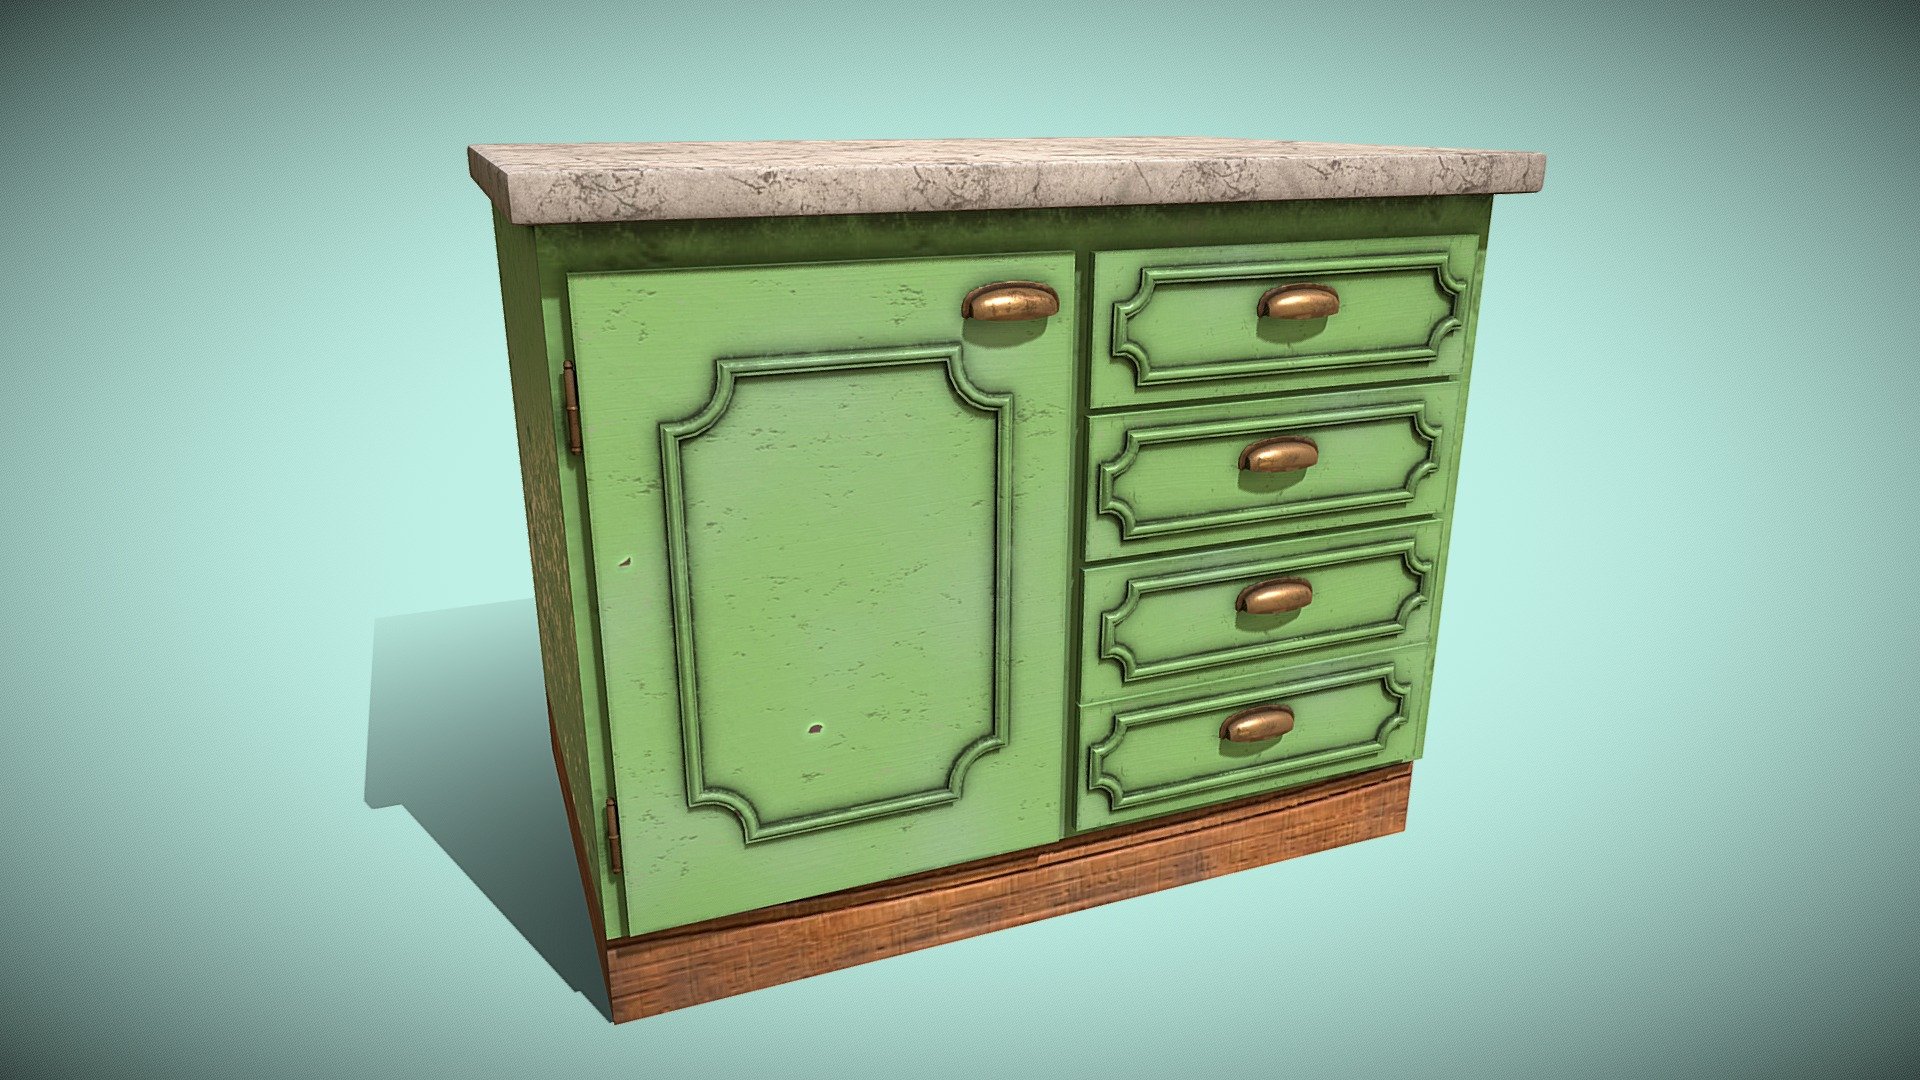 Realistic kitchen furniture with few polygons good to use in games and etc.
Textures in PBR size 2048.
All separate animations of opening and closing doors and drawers.
Additional downloads include more fbx obj and dae formats. one more model the same without being animated, and another one the same but without the interior 3d model